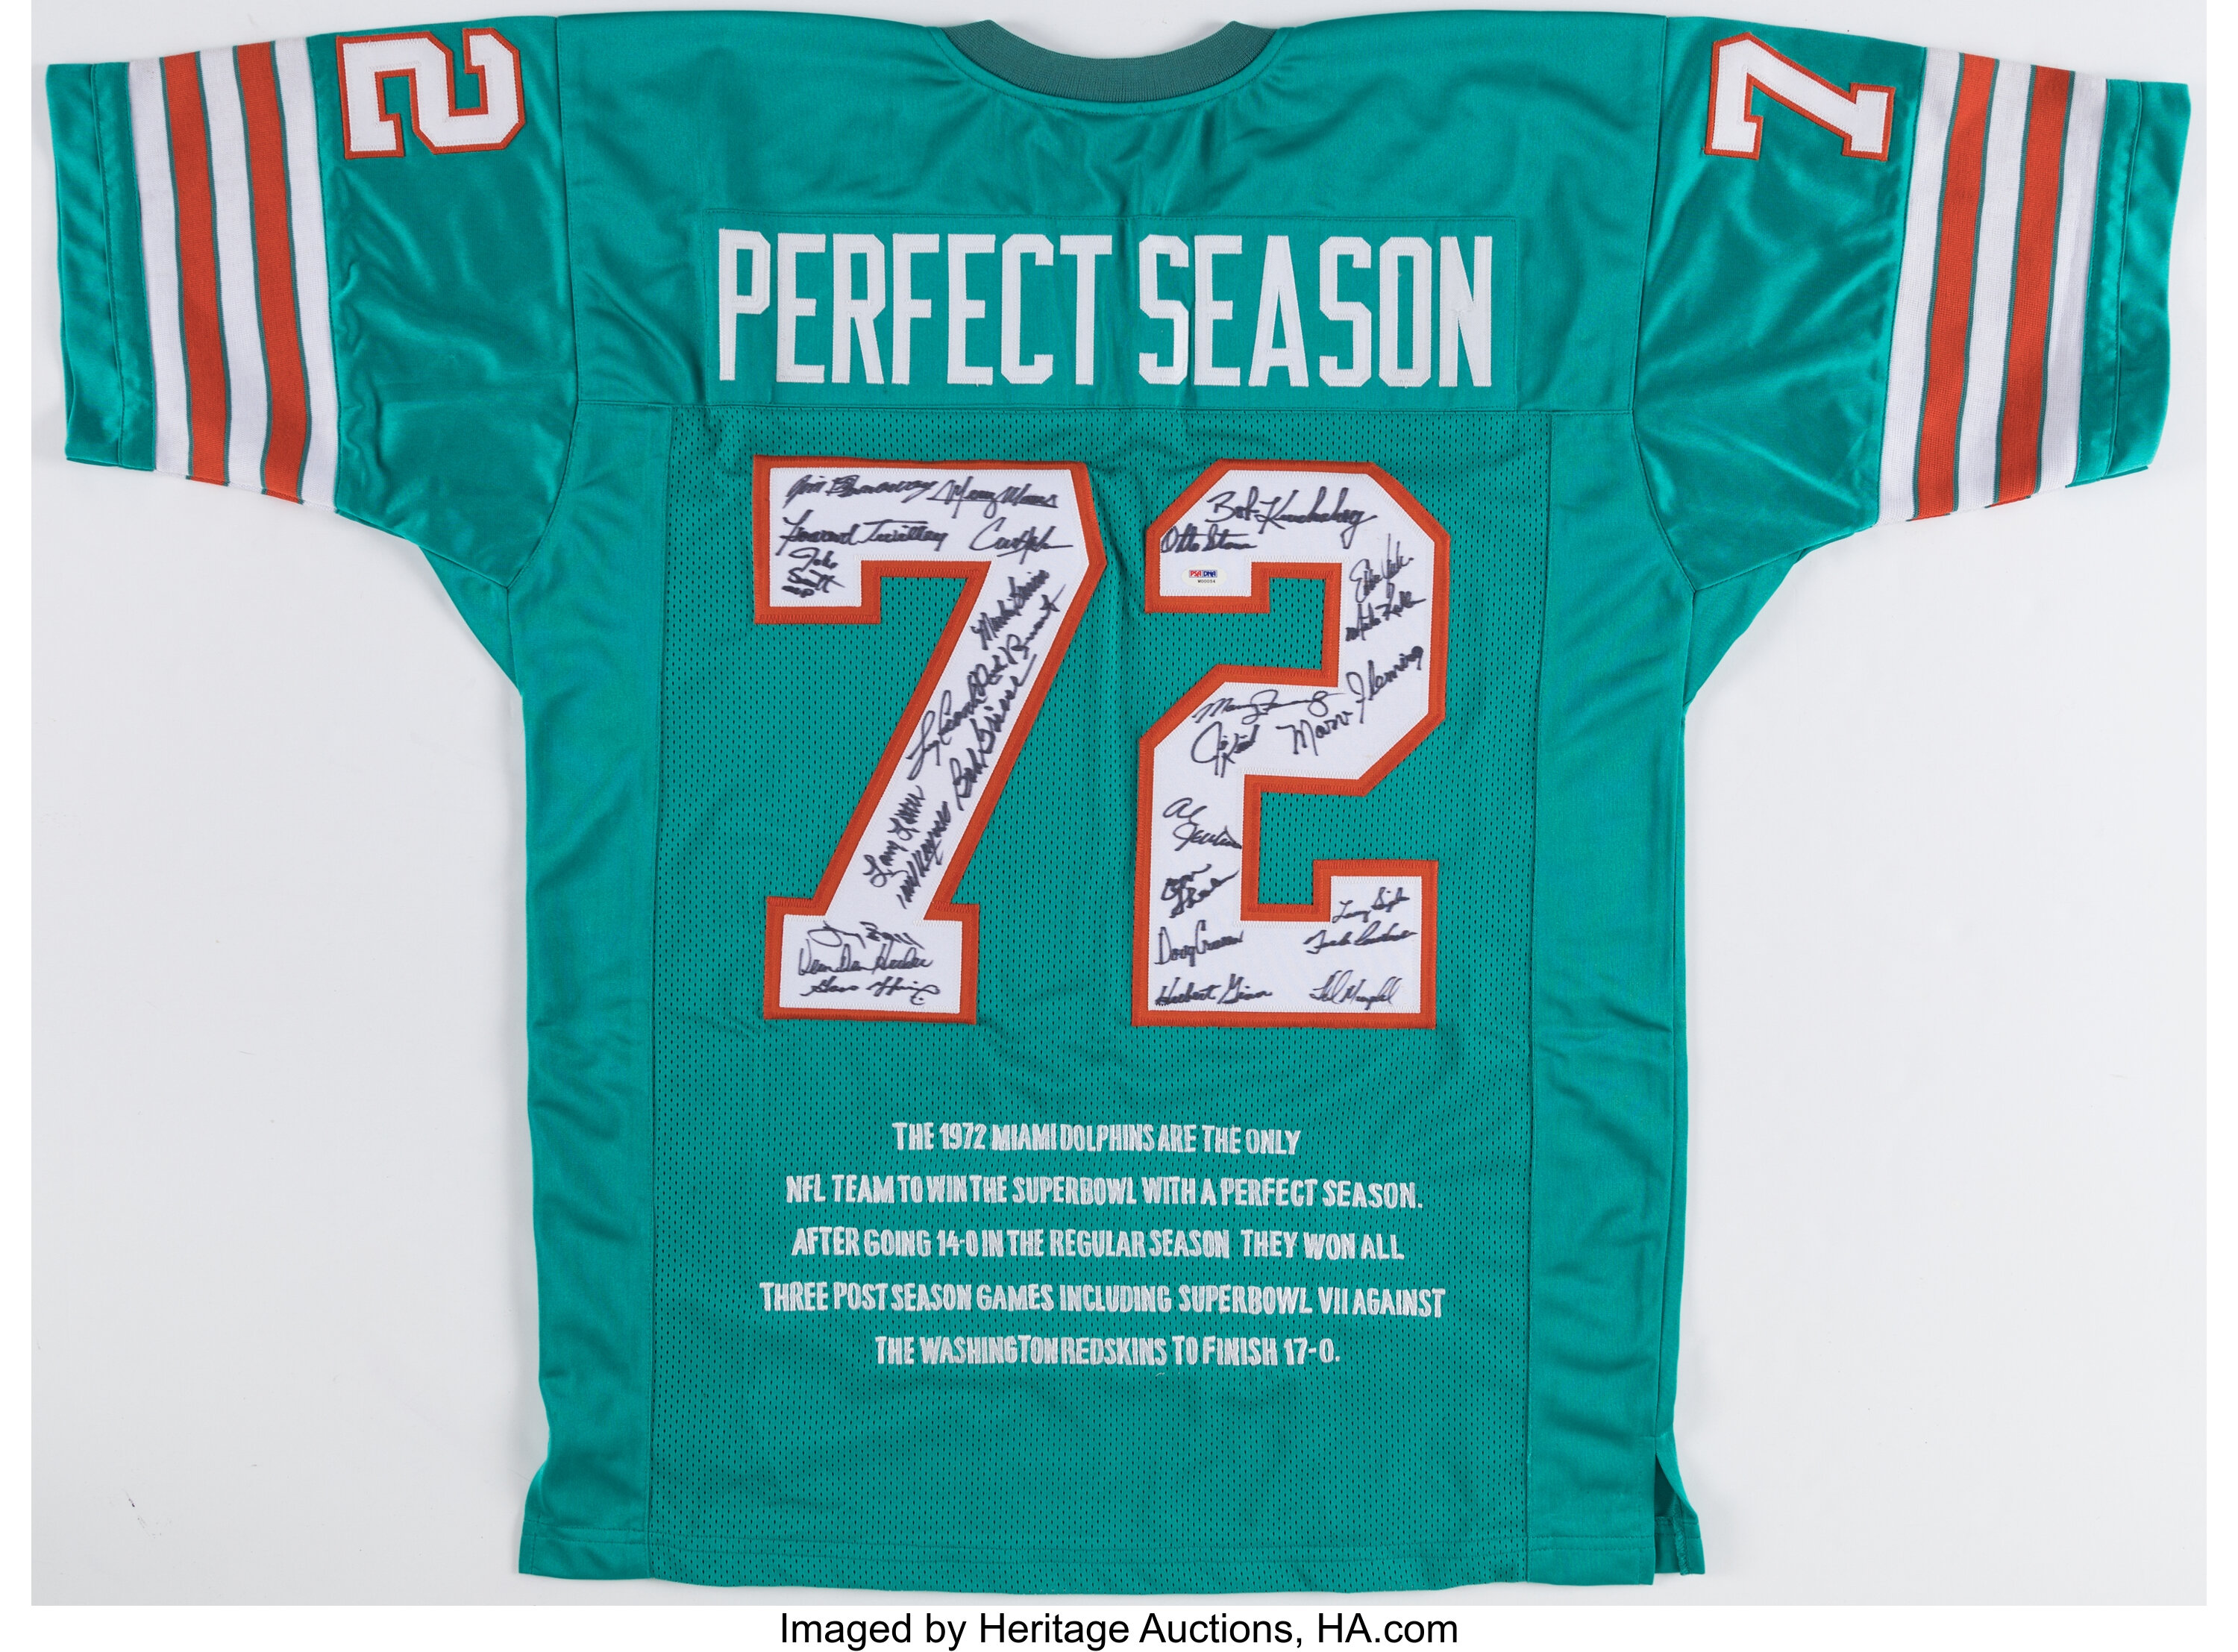 1972 Miami Dolphins Team Signed Undefeated Season Reunion Jersey